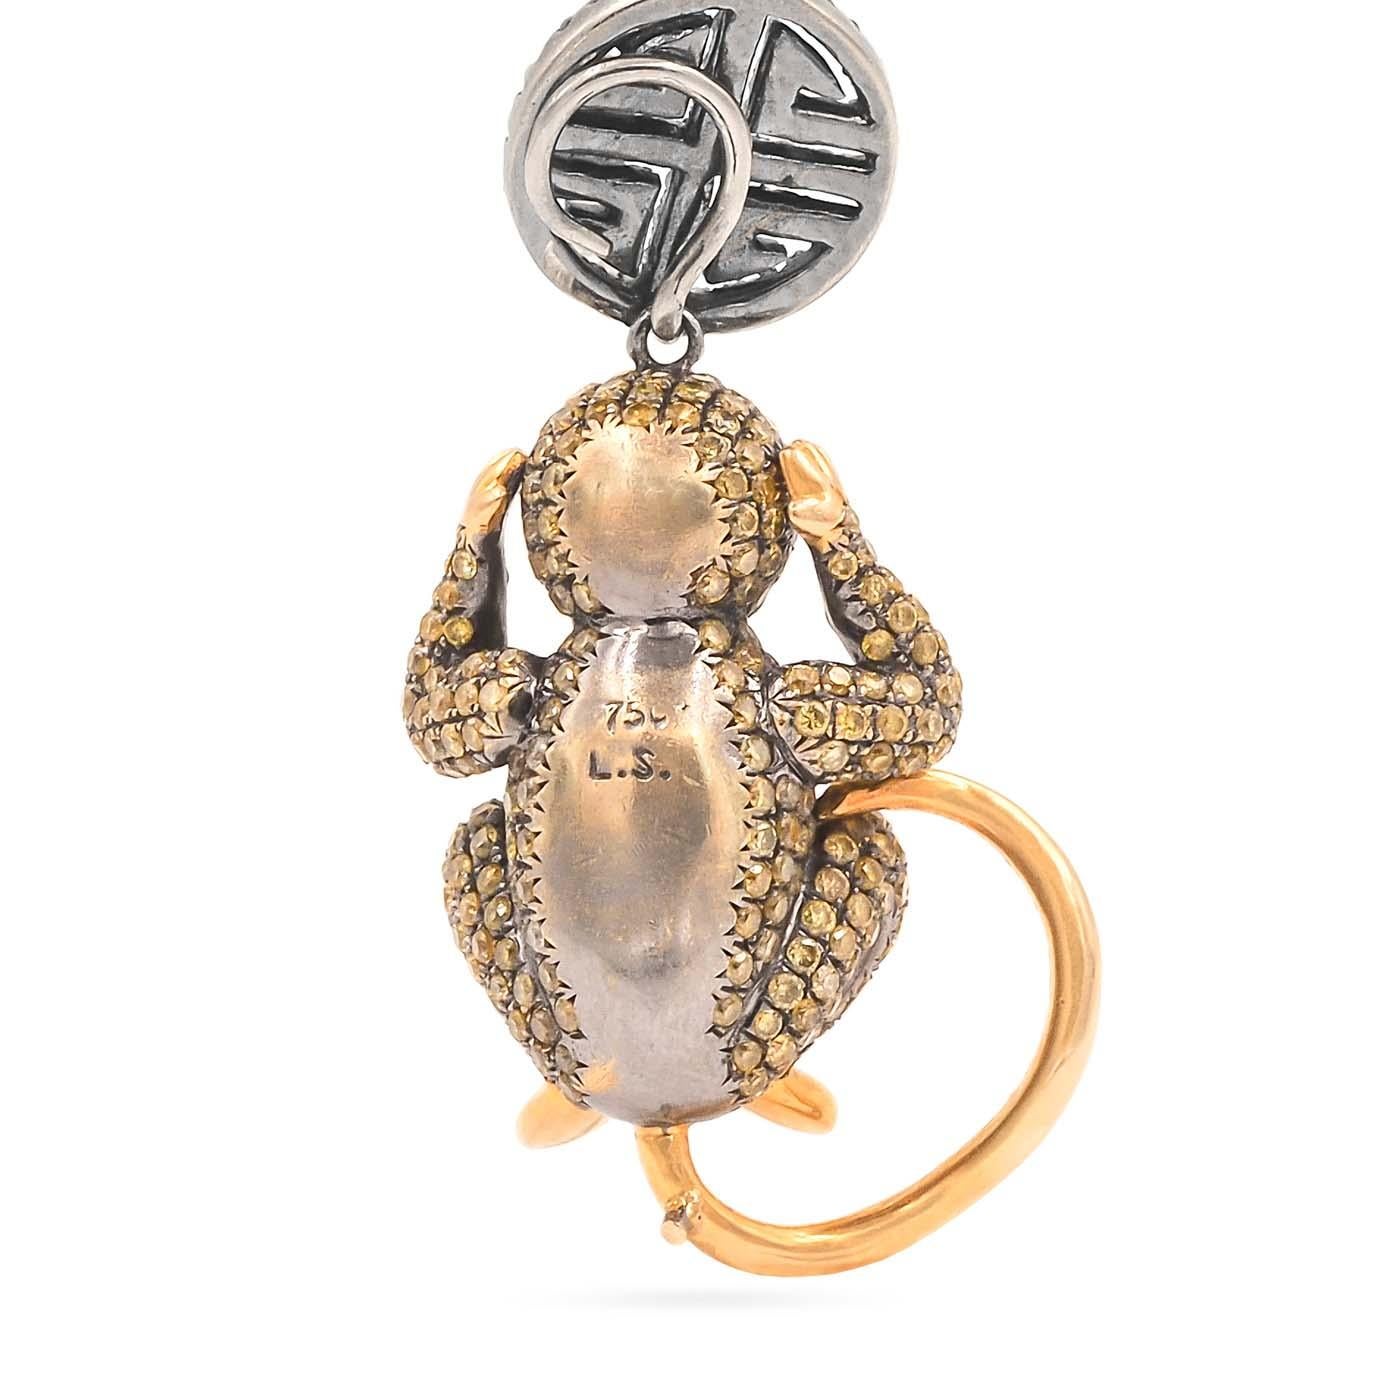 'Hear No Evil' Diamond Monkey Pendant Necklace by Lorraine Schwartz, composed of 18k yellow gold. The pendant depicts a three dimensional monkey with its hands on its ears and is set with approximately 1.70 carats of yellow and white diamonds; with